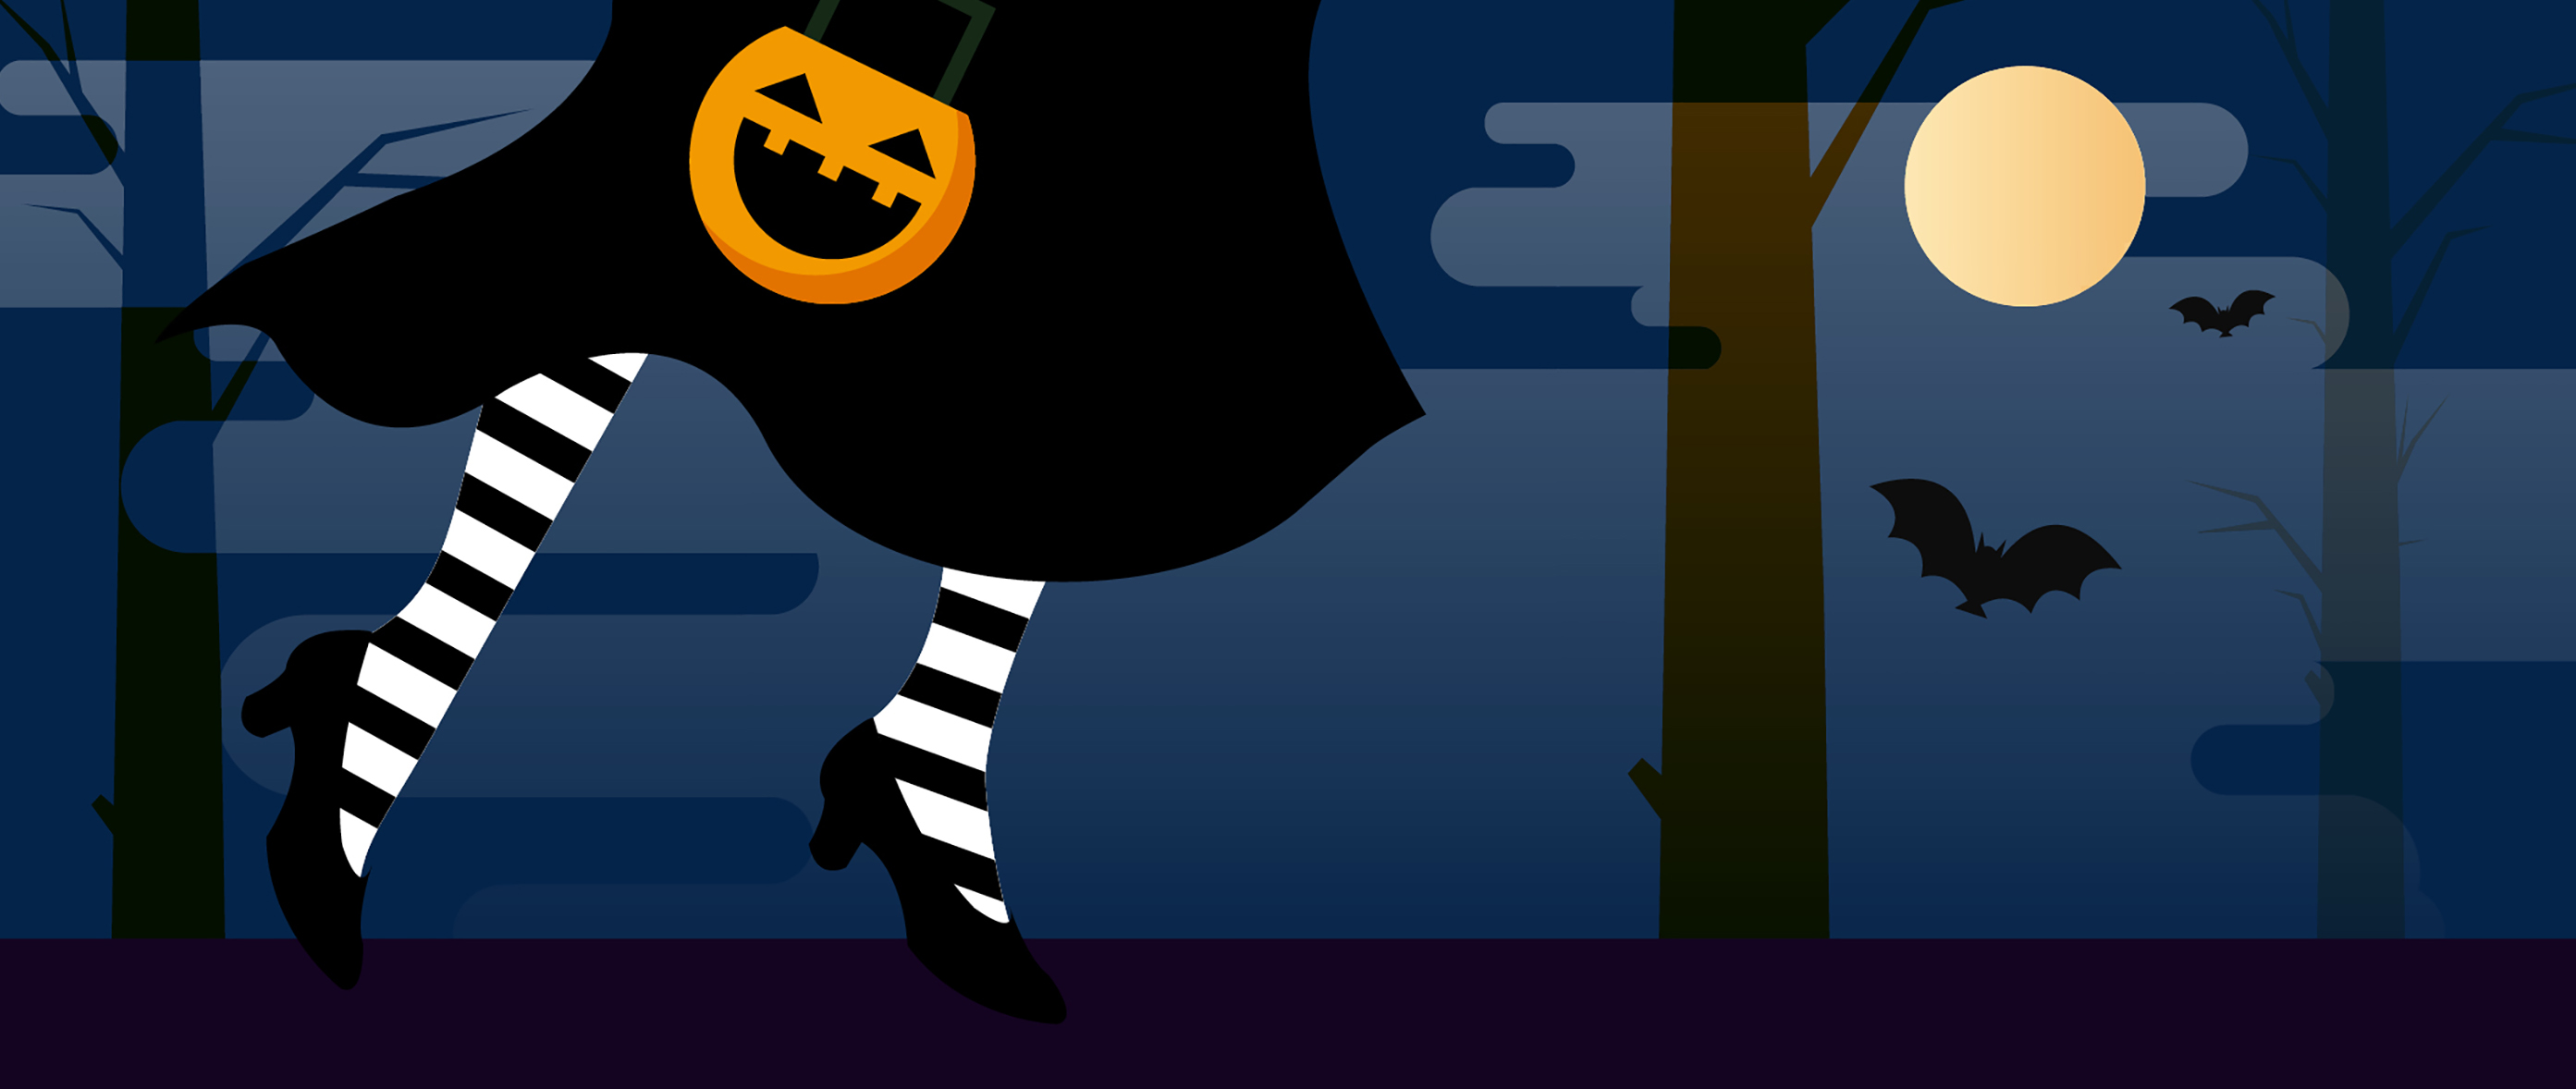 Cartoon image of a witch trick or treating, with a full moon and bats in the background.